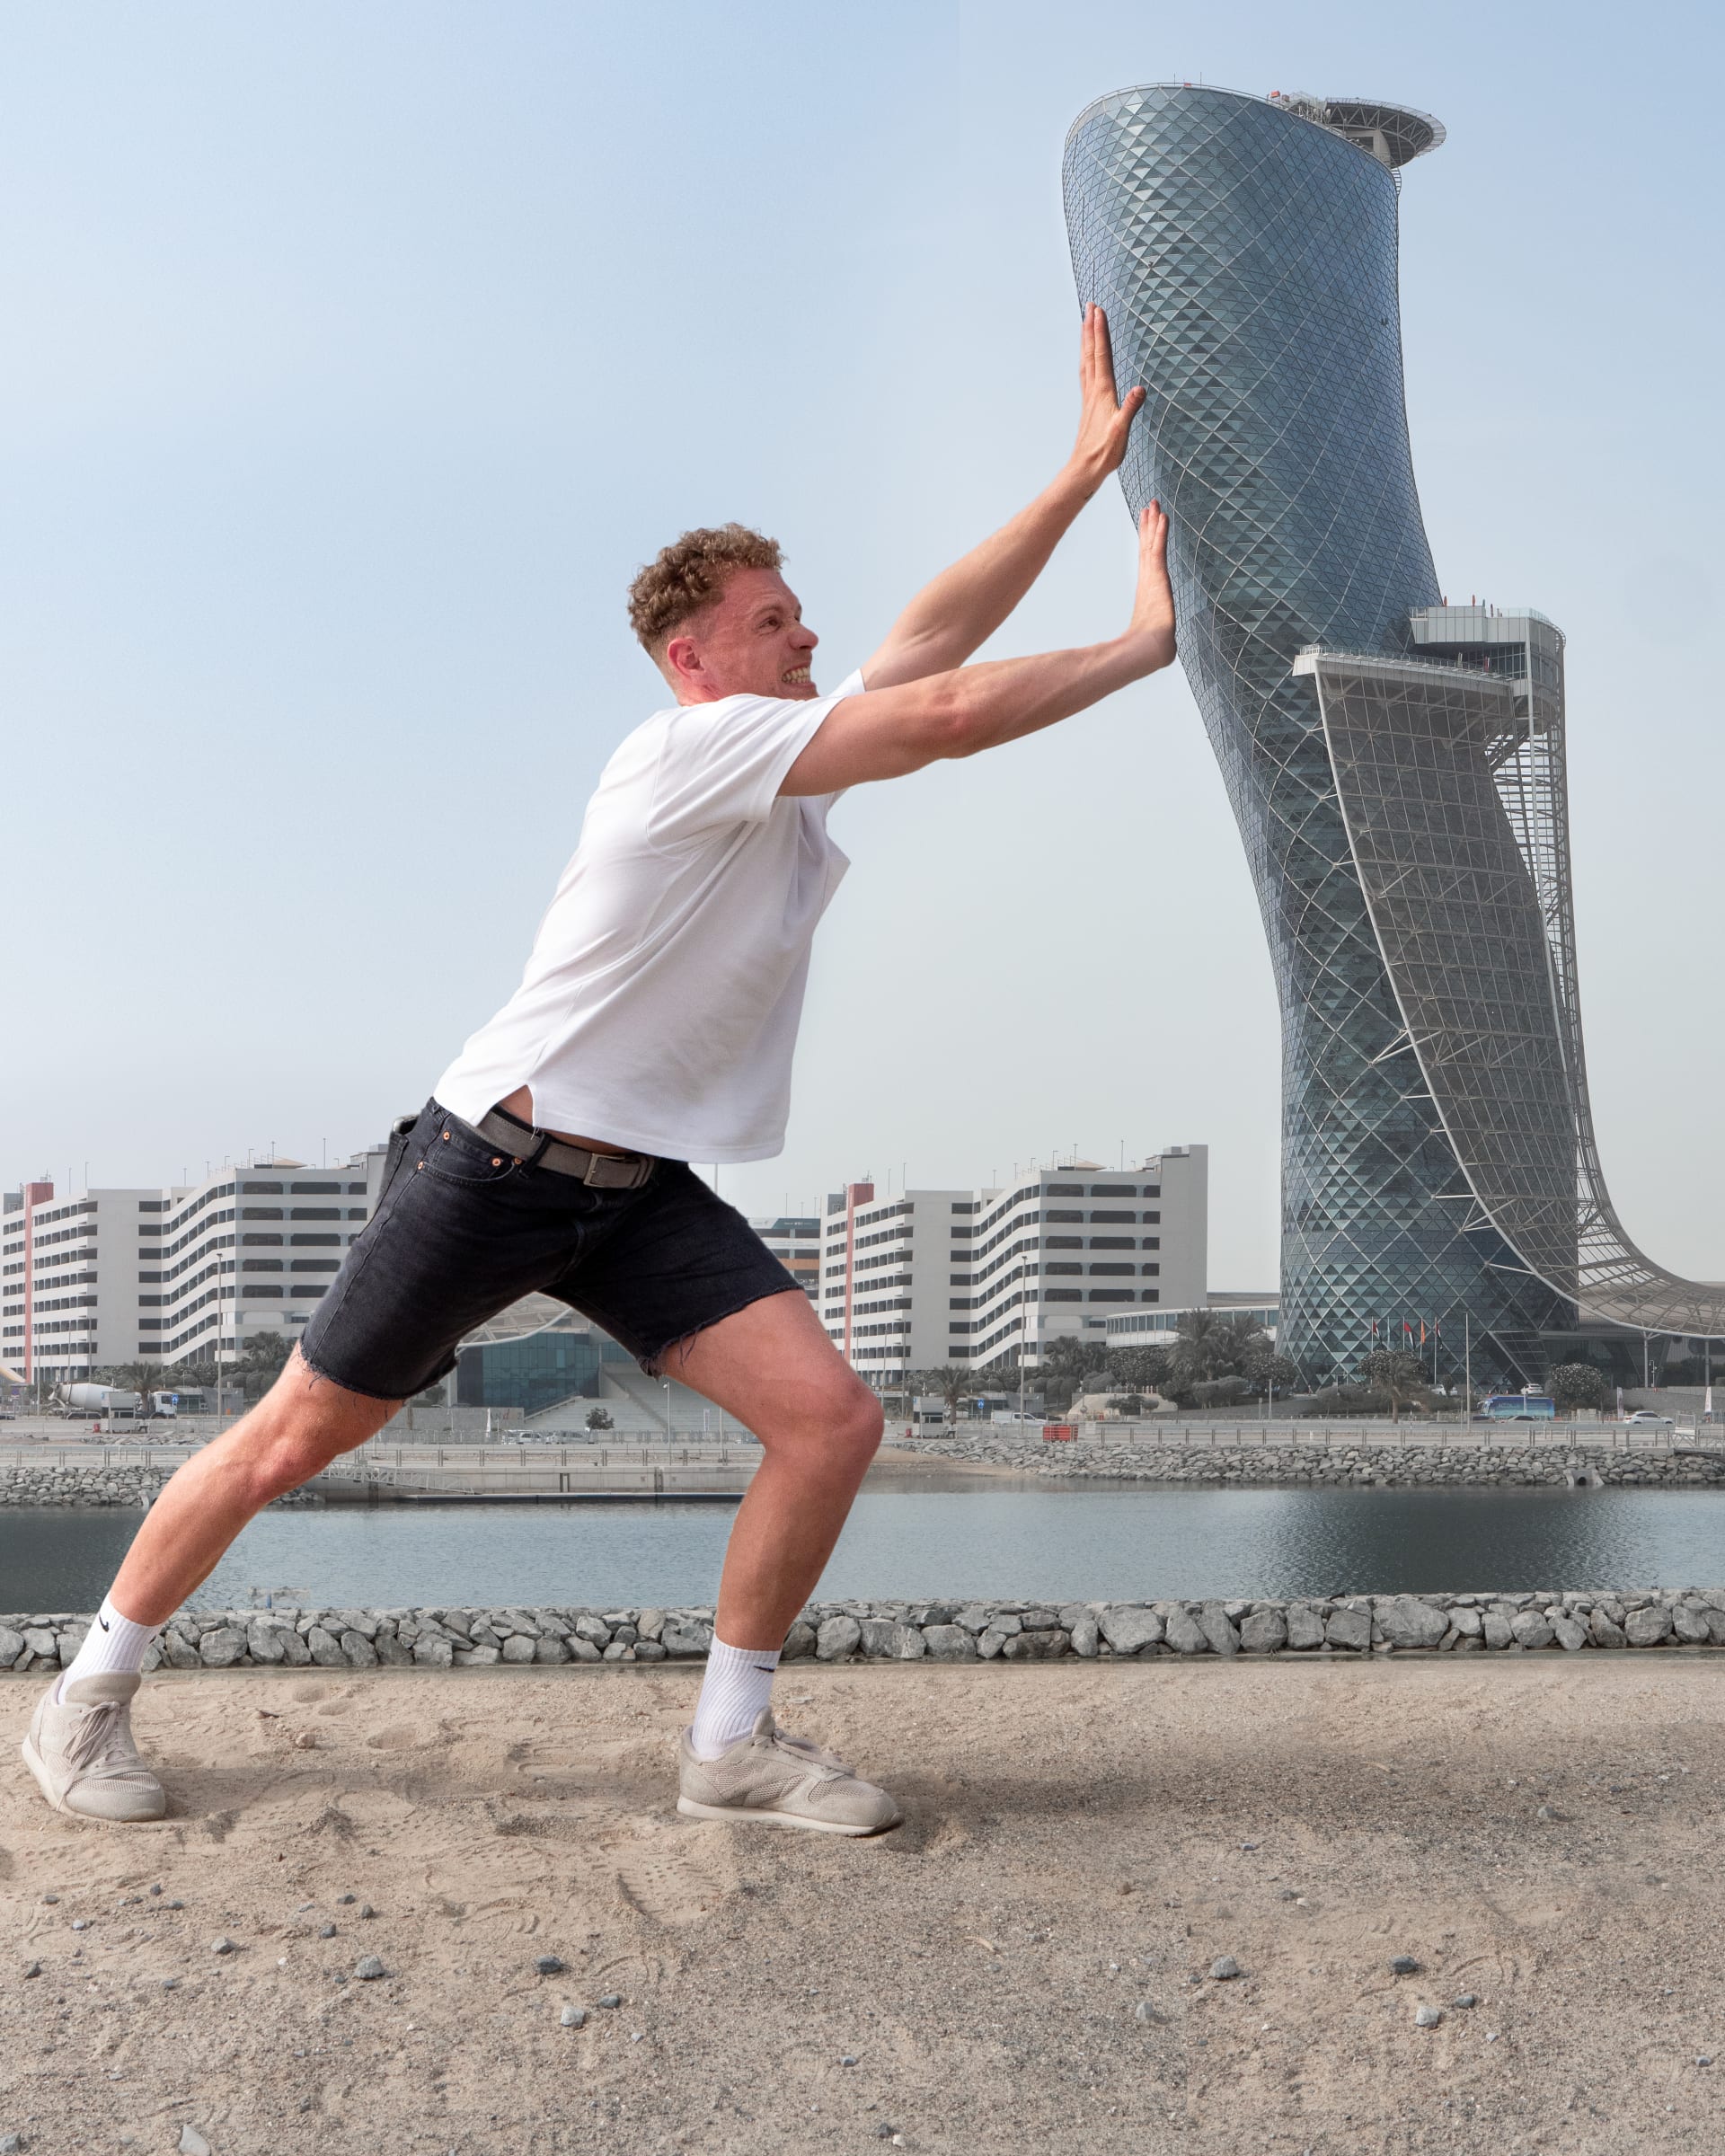 A giant in the city..A British man highlights Abu Dhabi landmarks as you have never seen him before